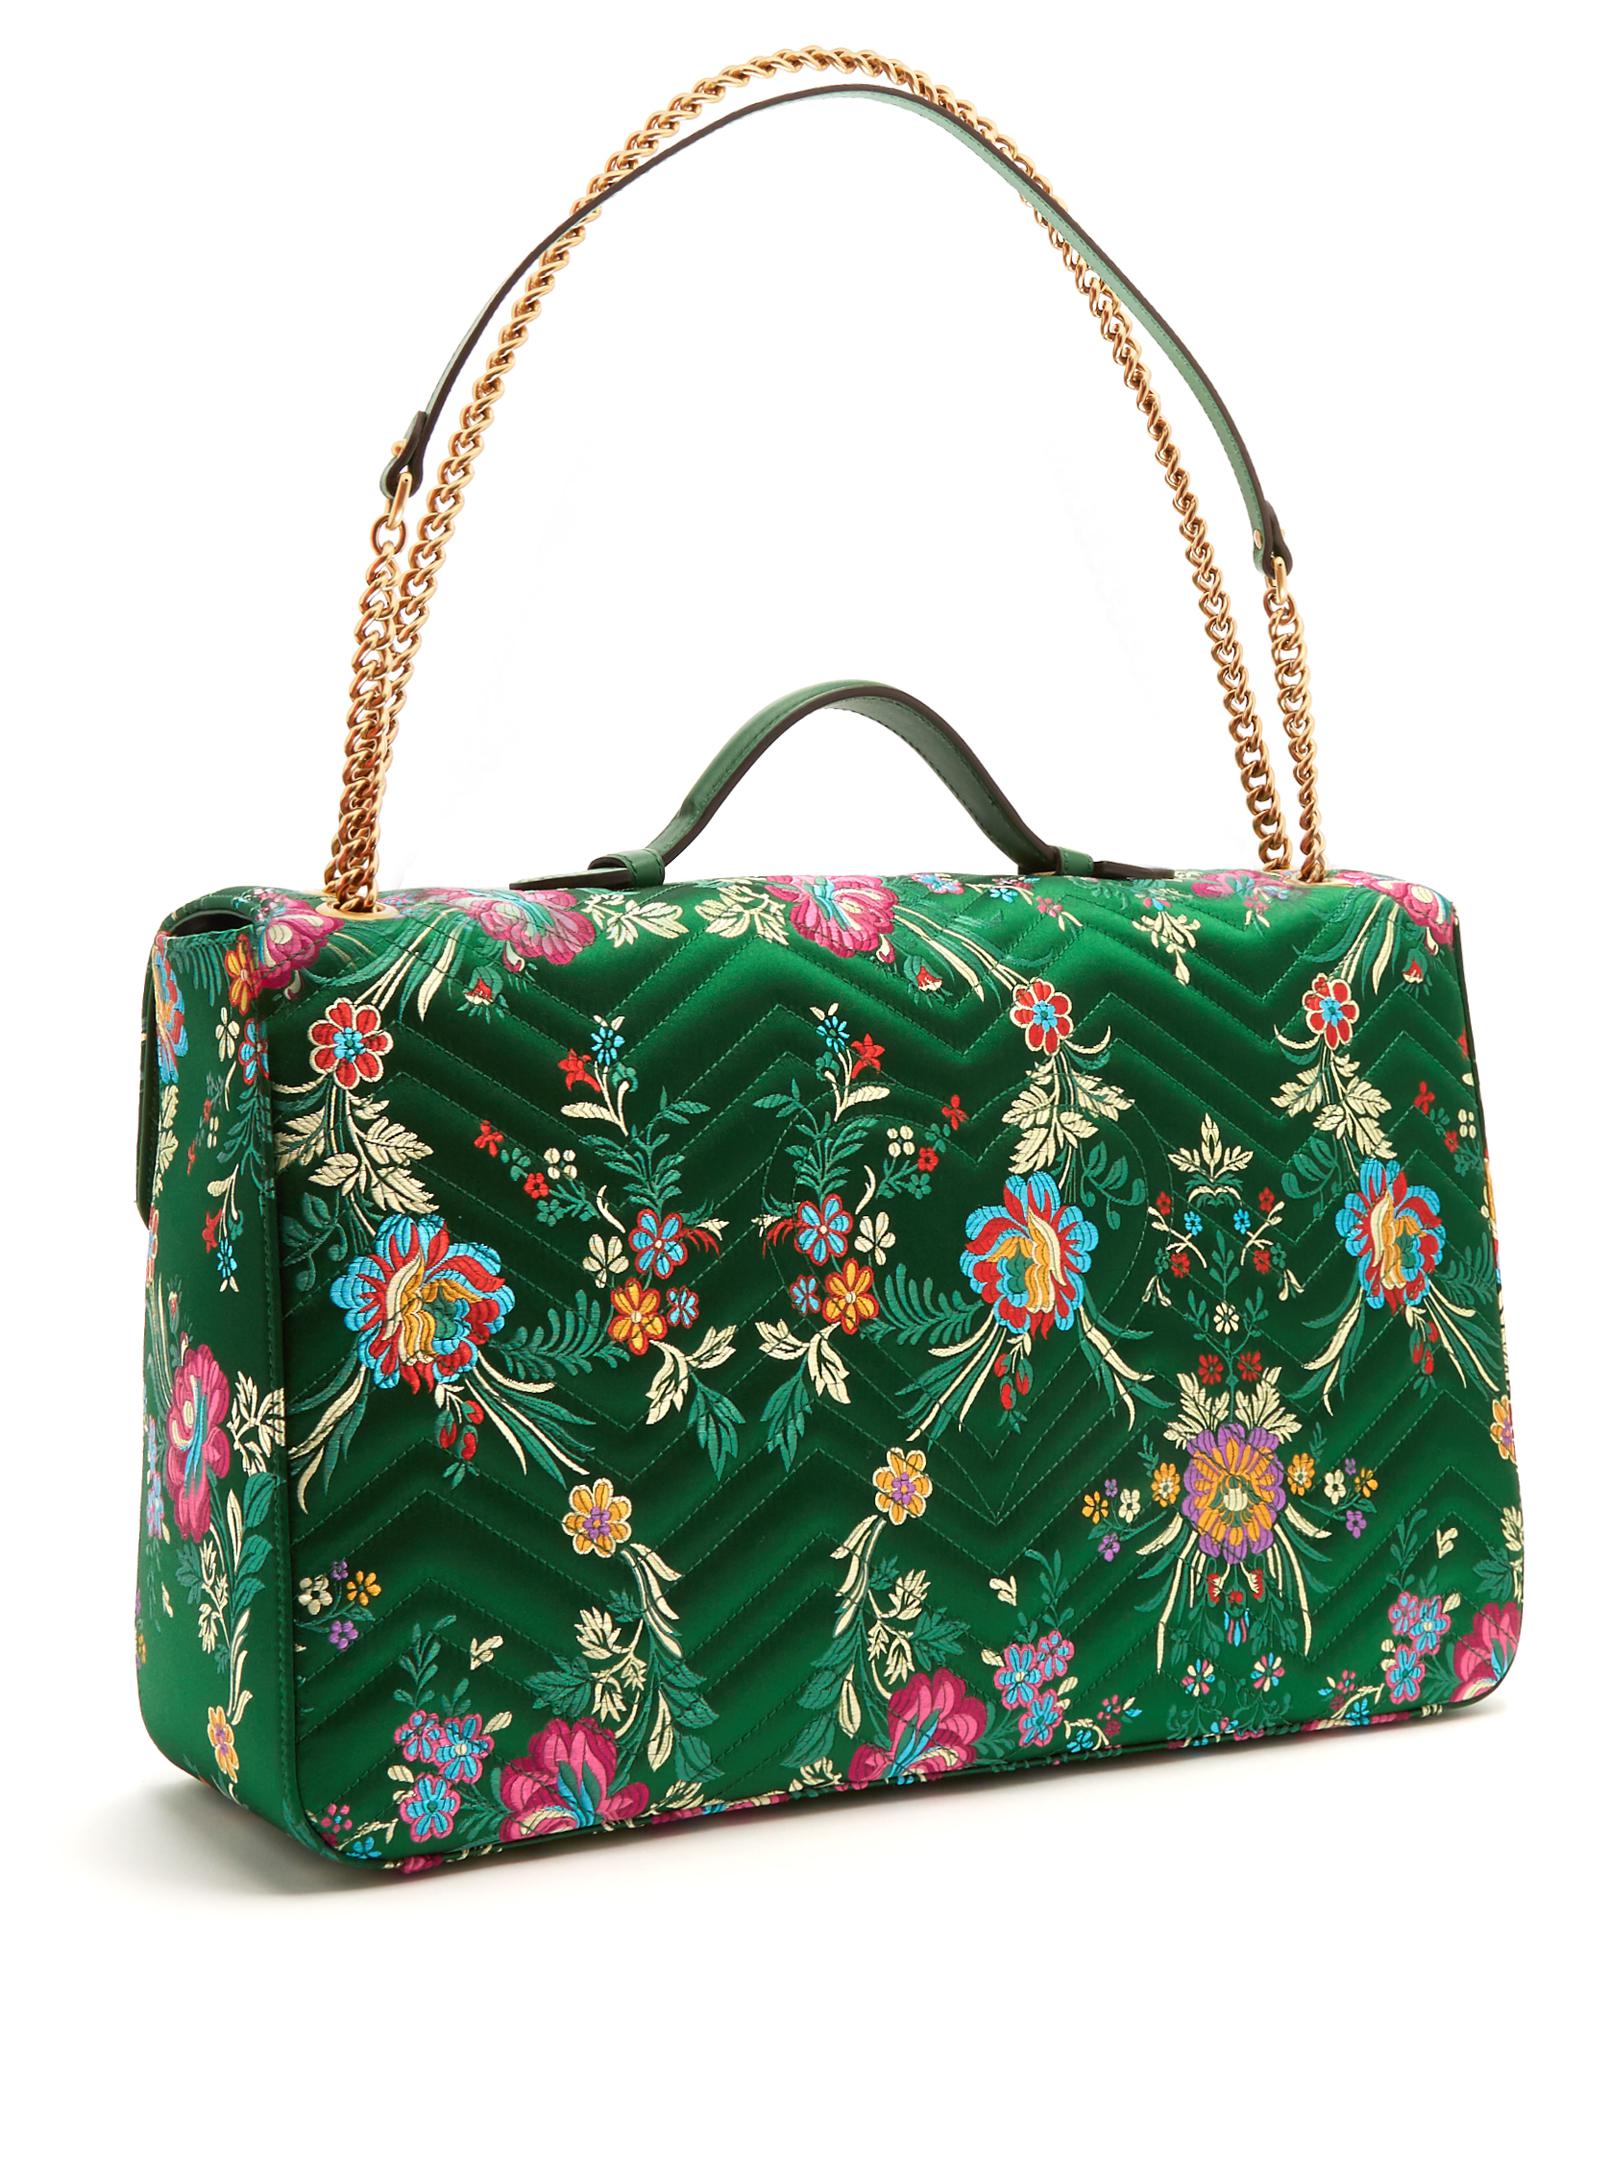 Gucci Gg Marmont Maxi Floral-jacquard Shoulder Bag in Green | Lyst